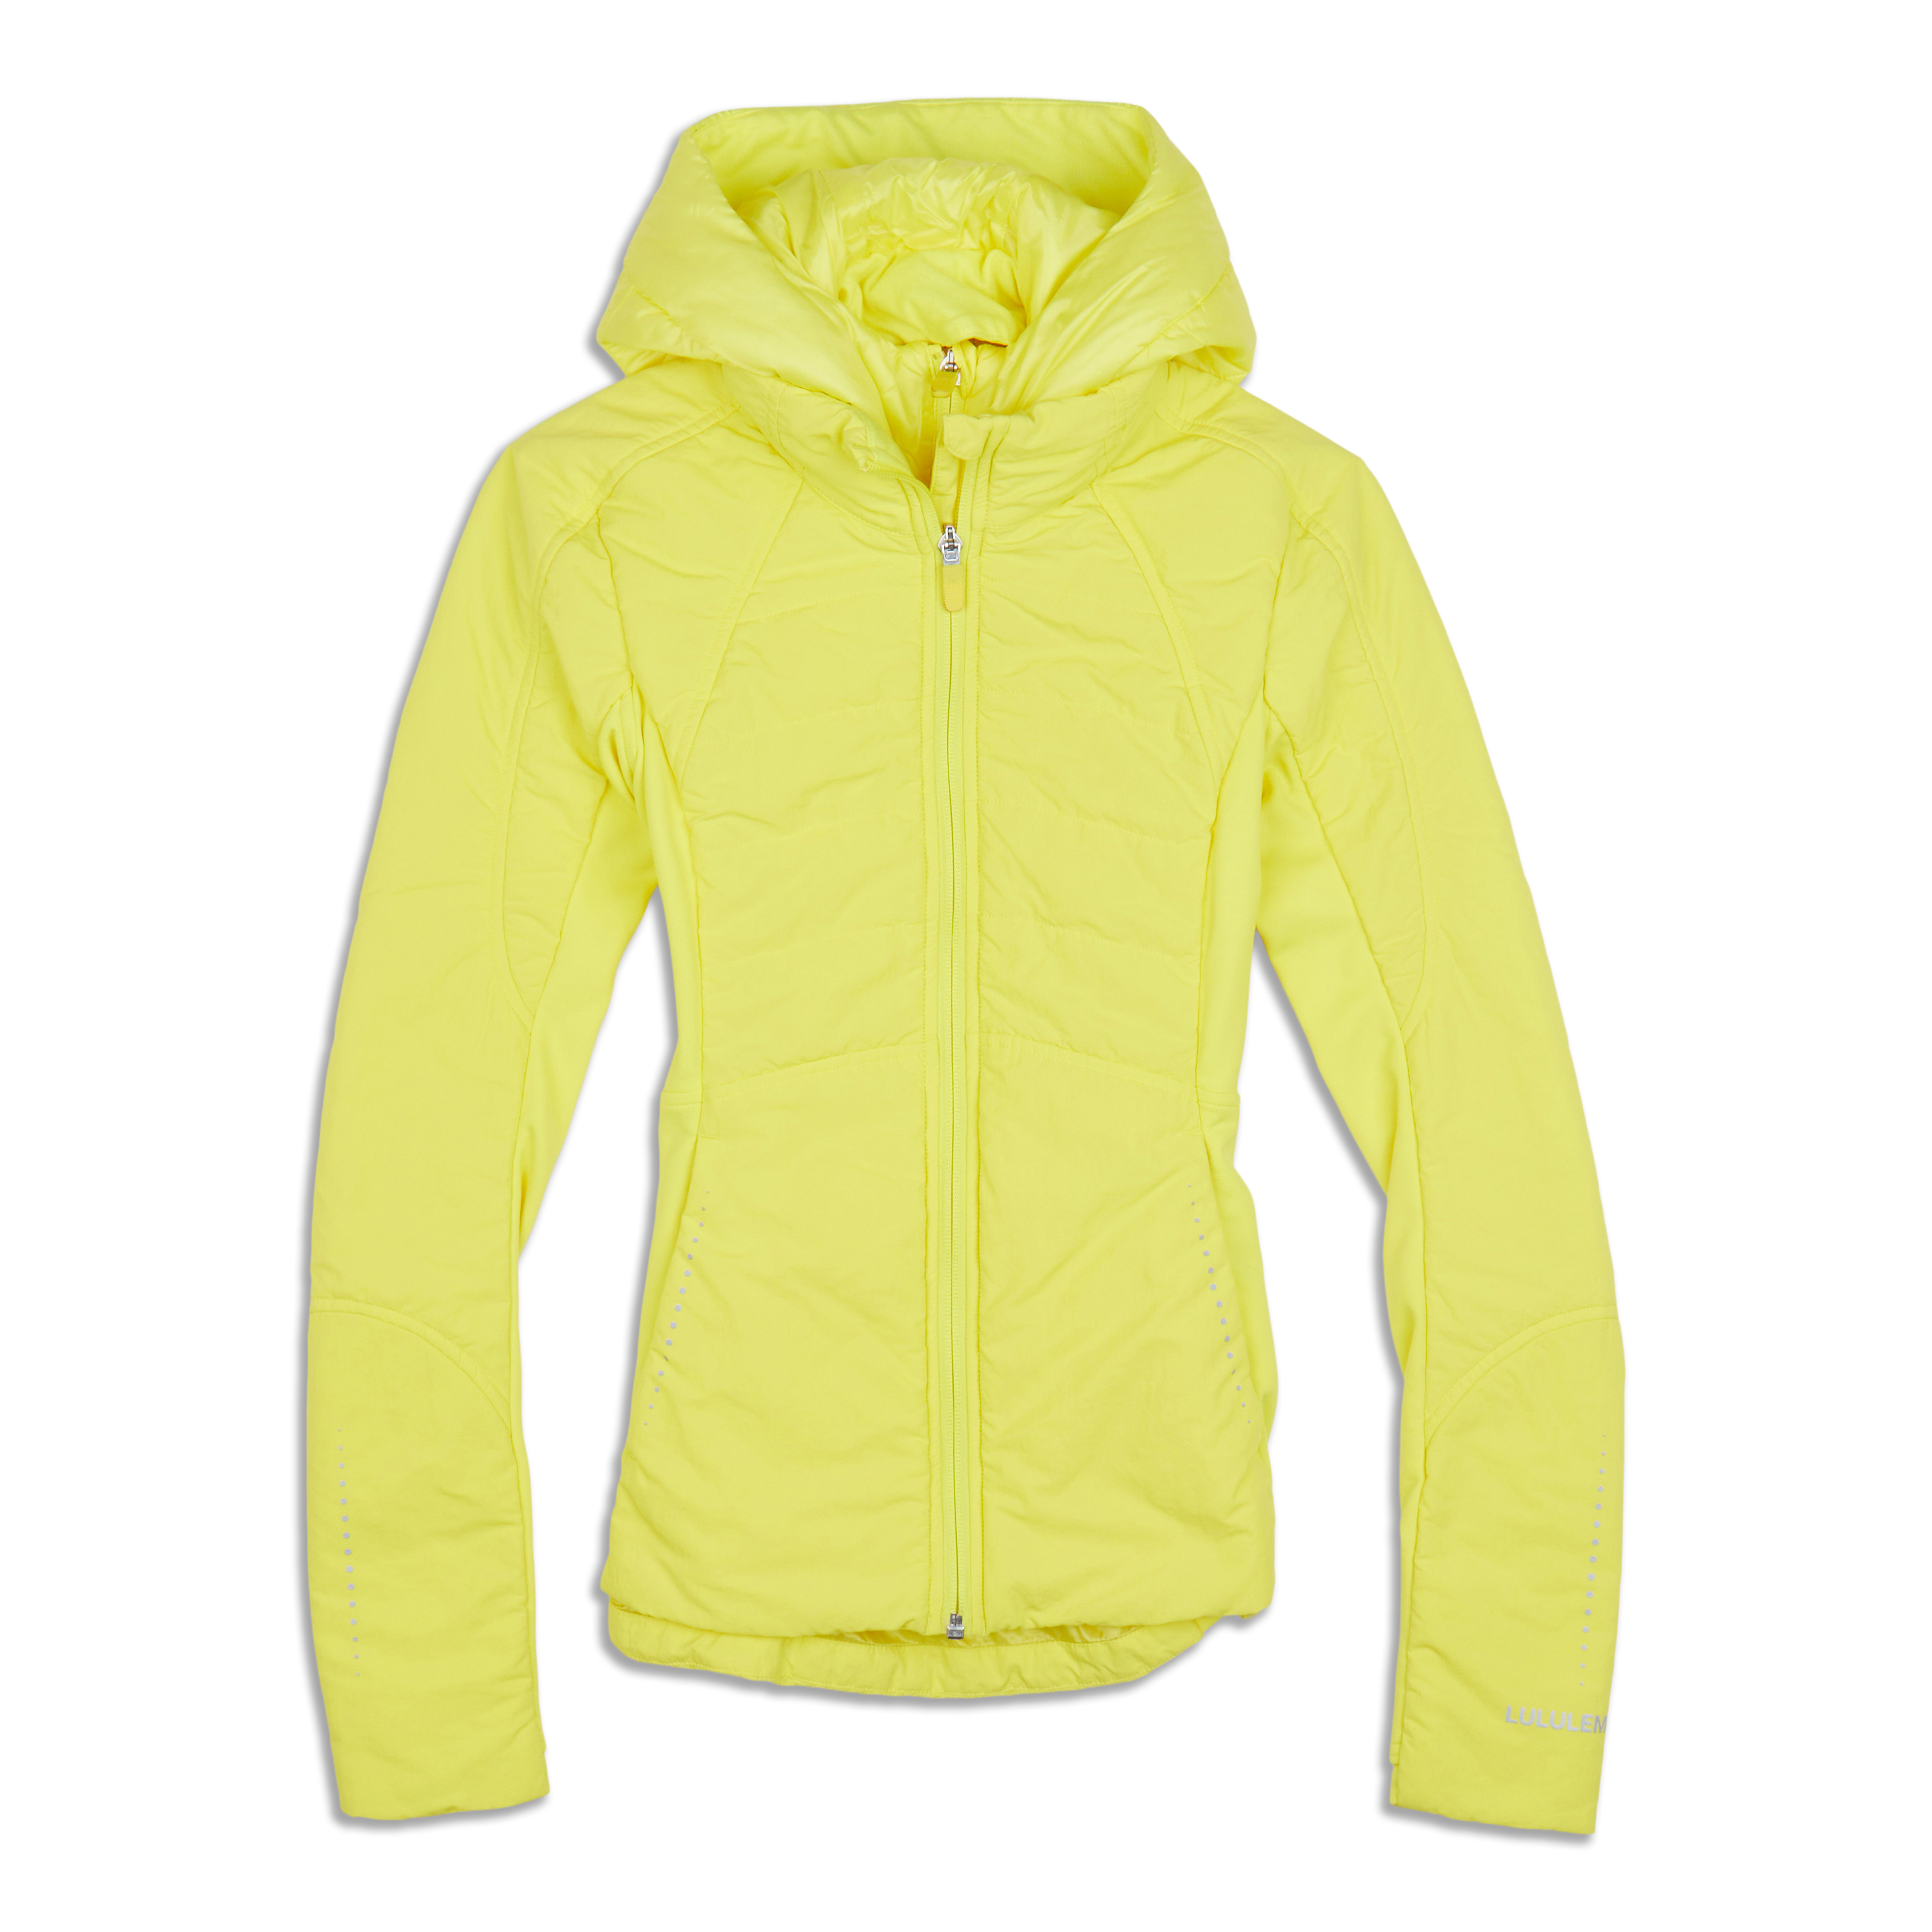 Why Lululemon's Another Mile Jacket is My Top Winter Workout Gear Essential  - Fashion Jackson